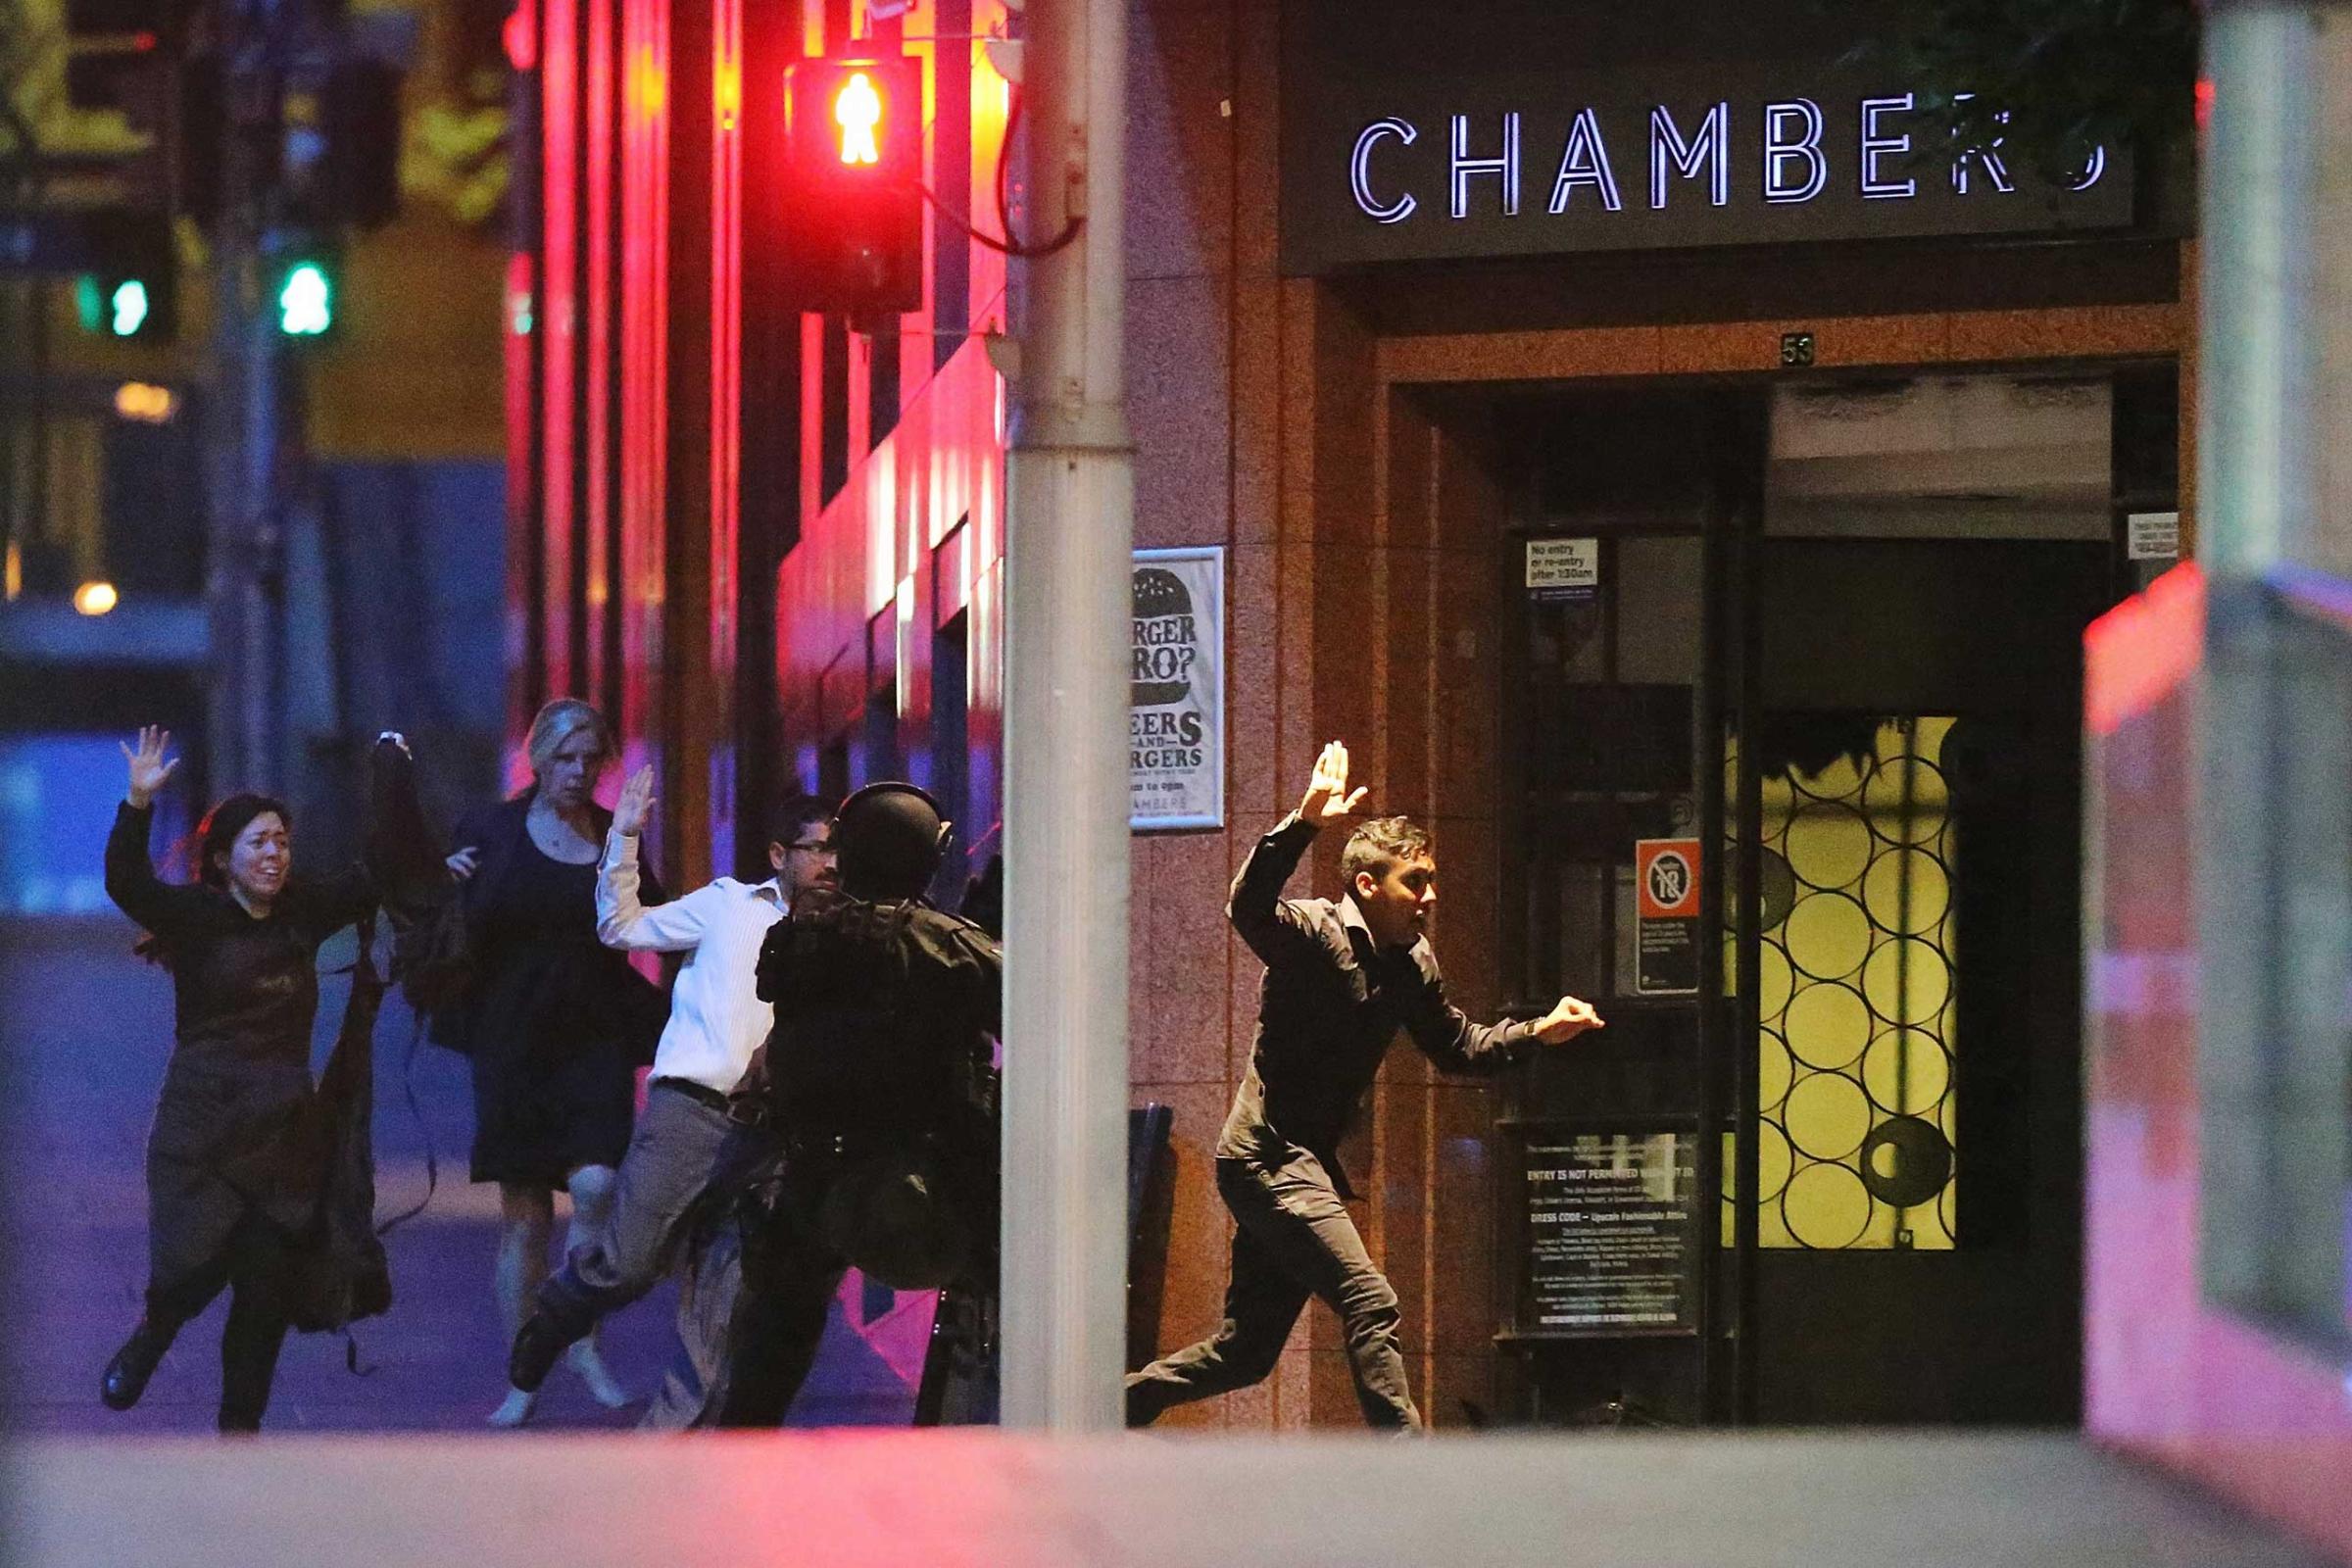 People run with there hands up from the Lindt Cafe, Martin Place during a hostage standoff on Dec. 15, 2014 in Sydney.